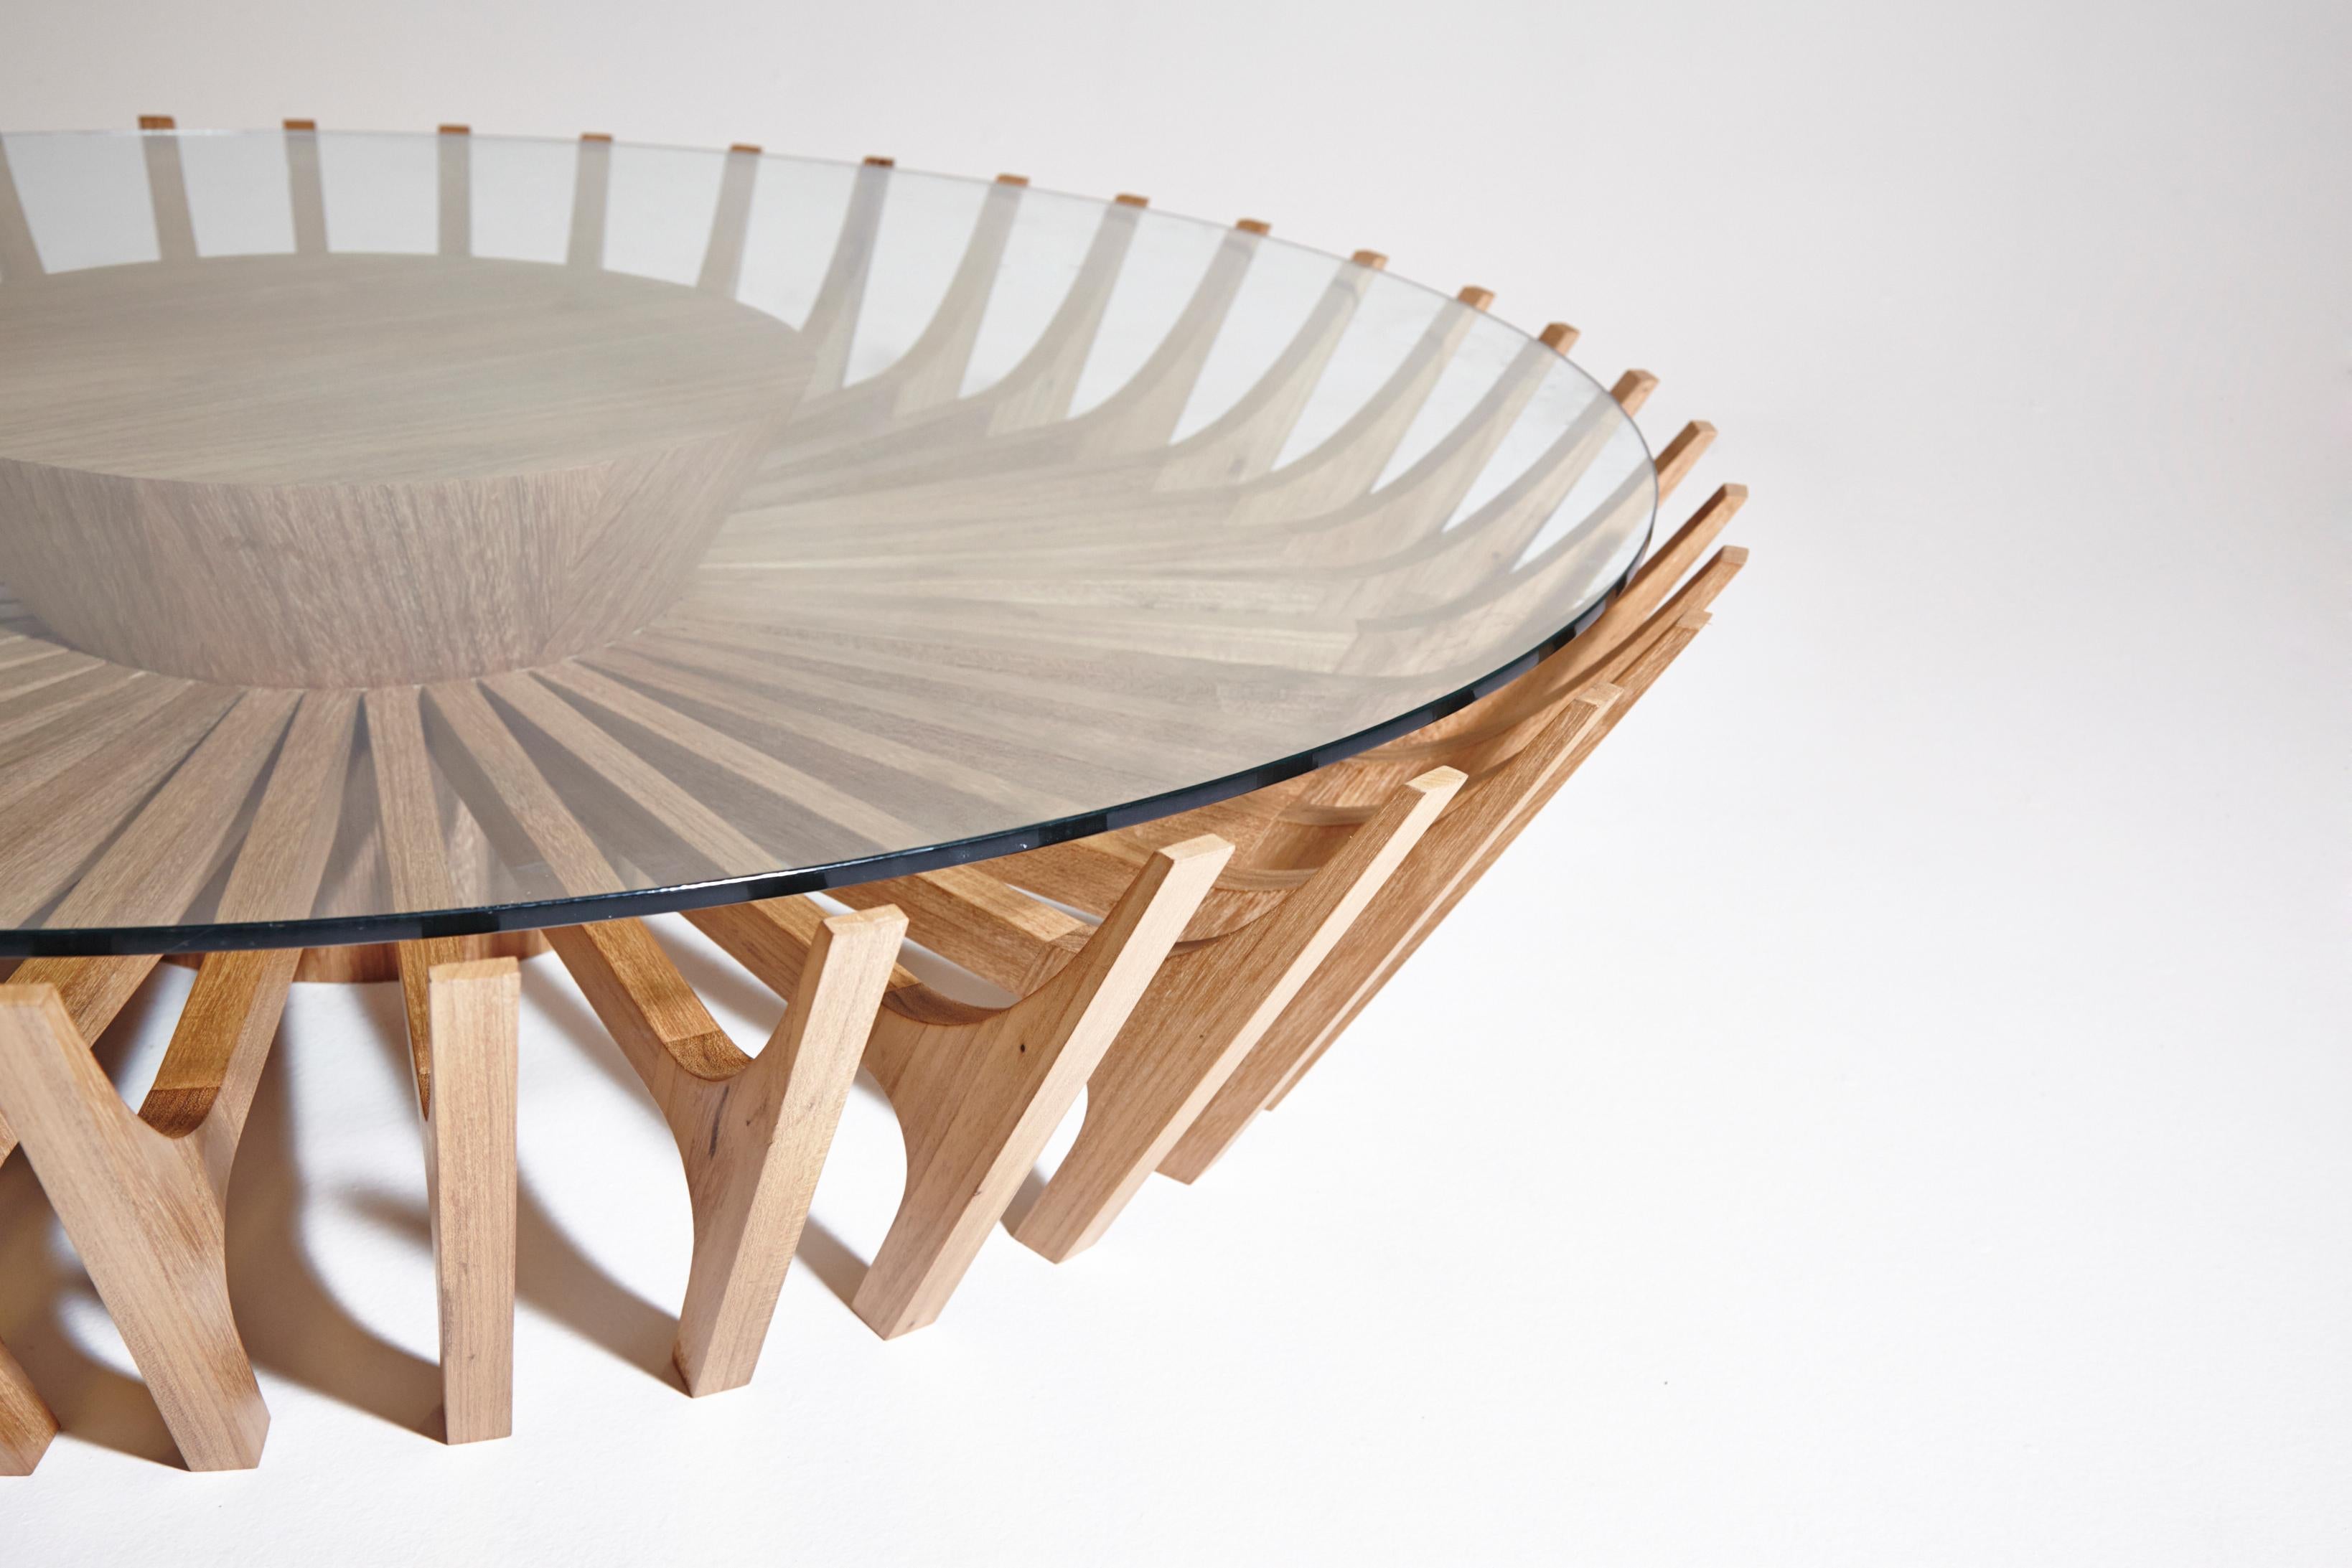 The third piece that appeared in the Congonhas collection draws attention by drawing, which suggests continuous movement. The design of the table has already been compared to a modernist building, the trait that is always present at all times in